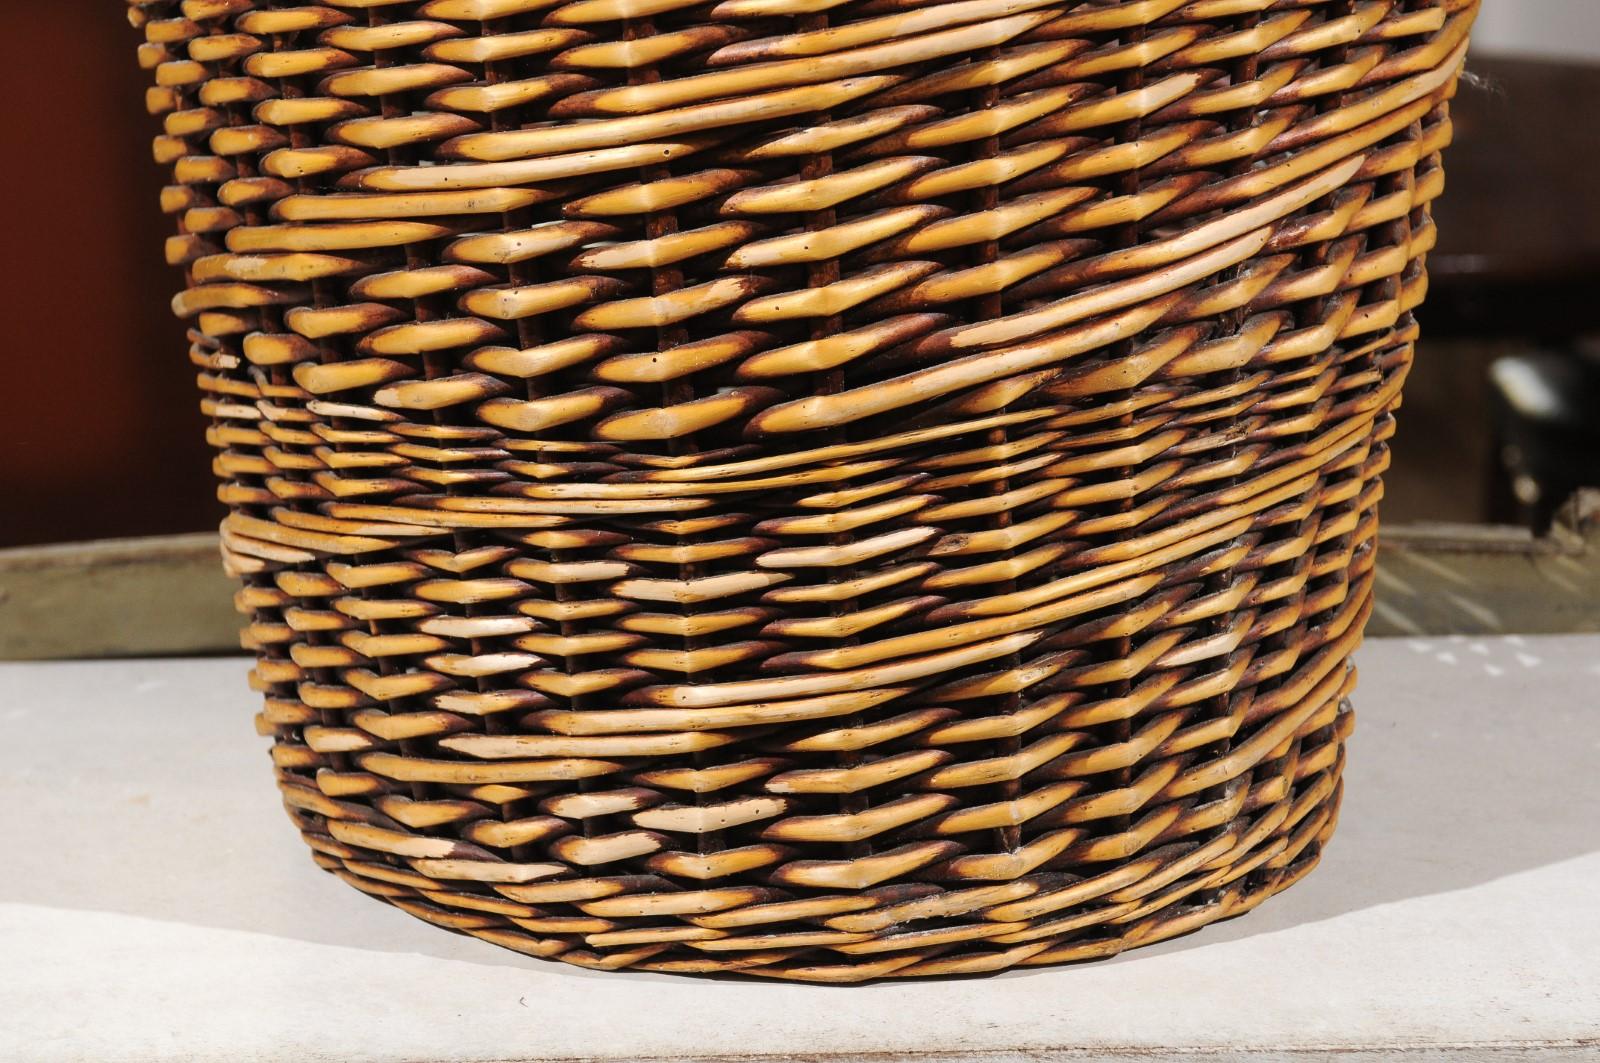 Rustic French Wicker Basket with Single Lateral Handle and Diagonal Patterns 1